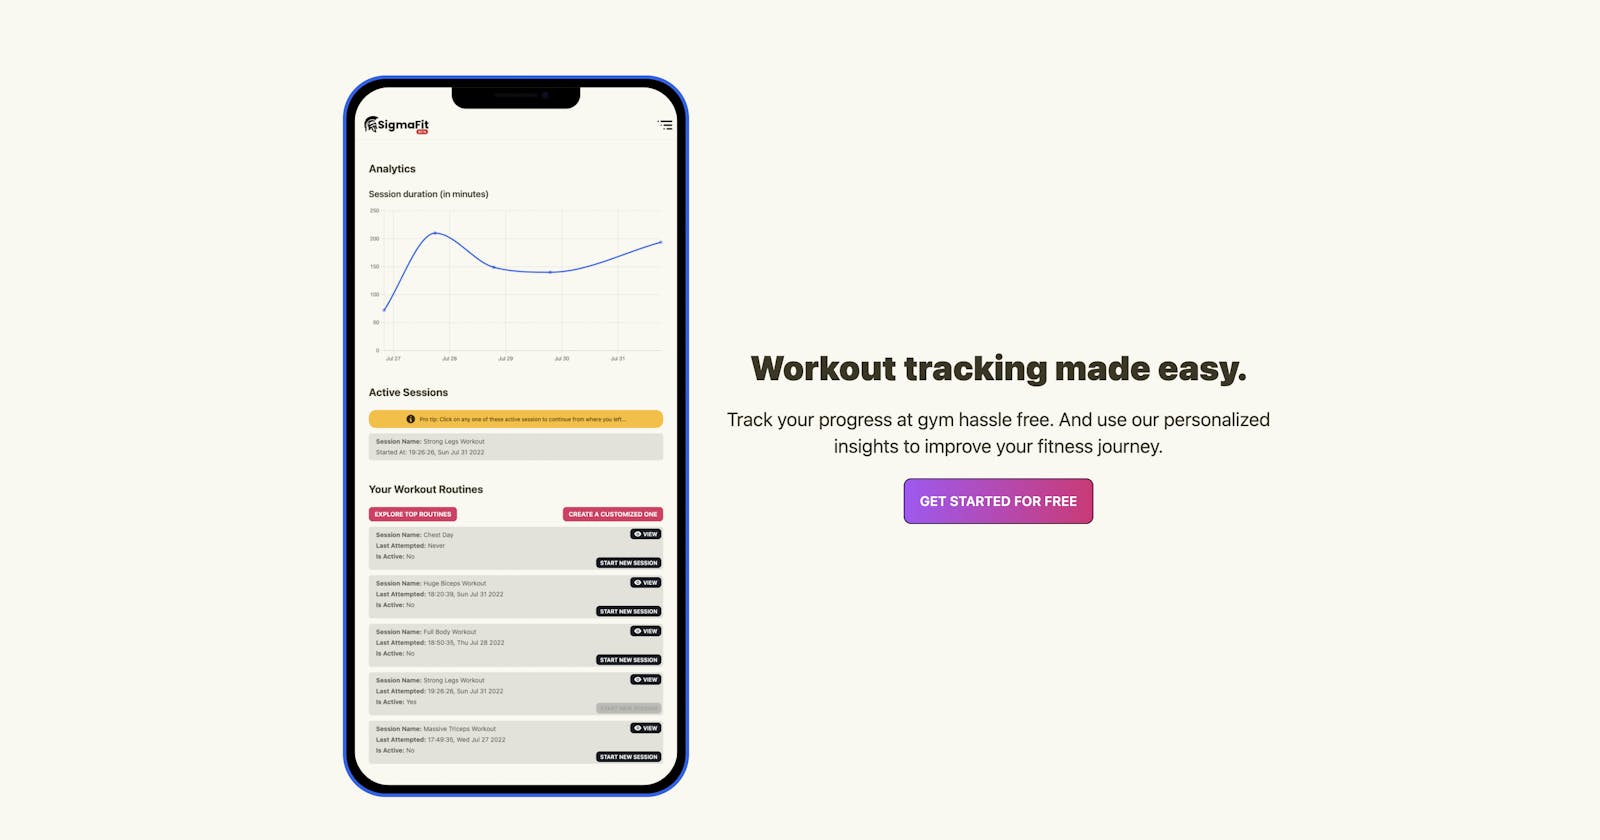 SigmaFit: Workout tracking made easy